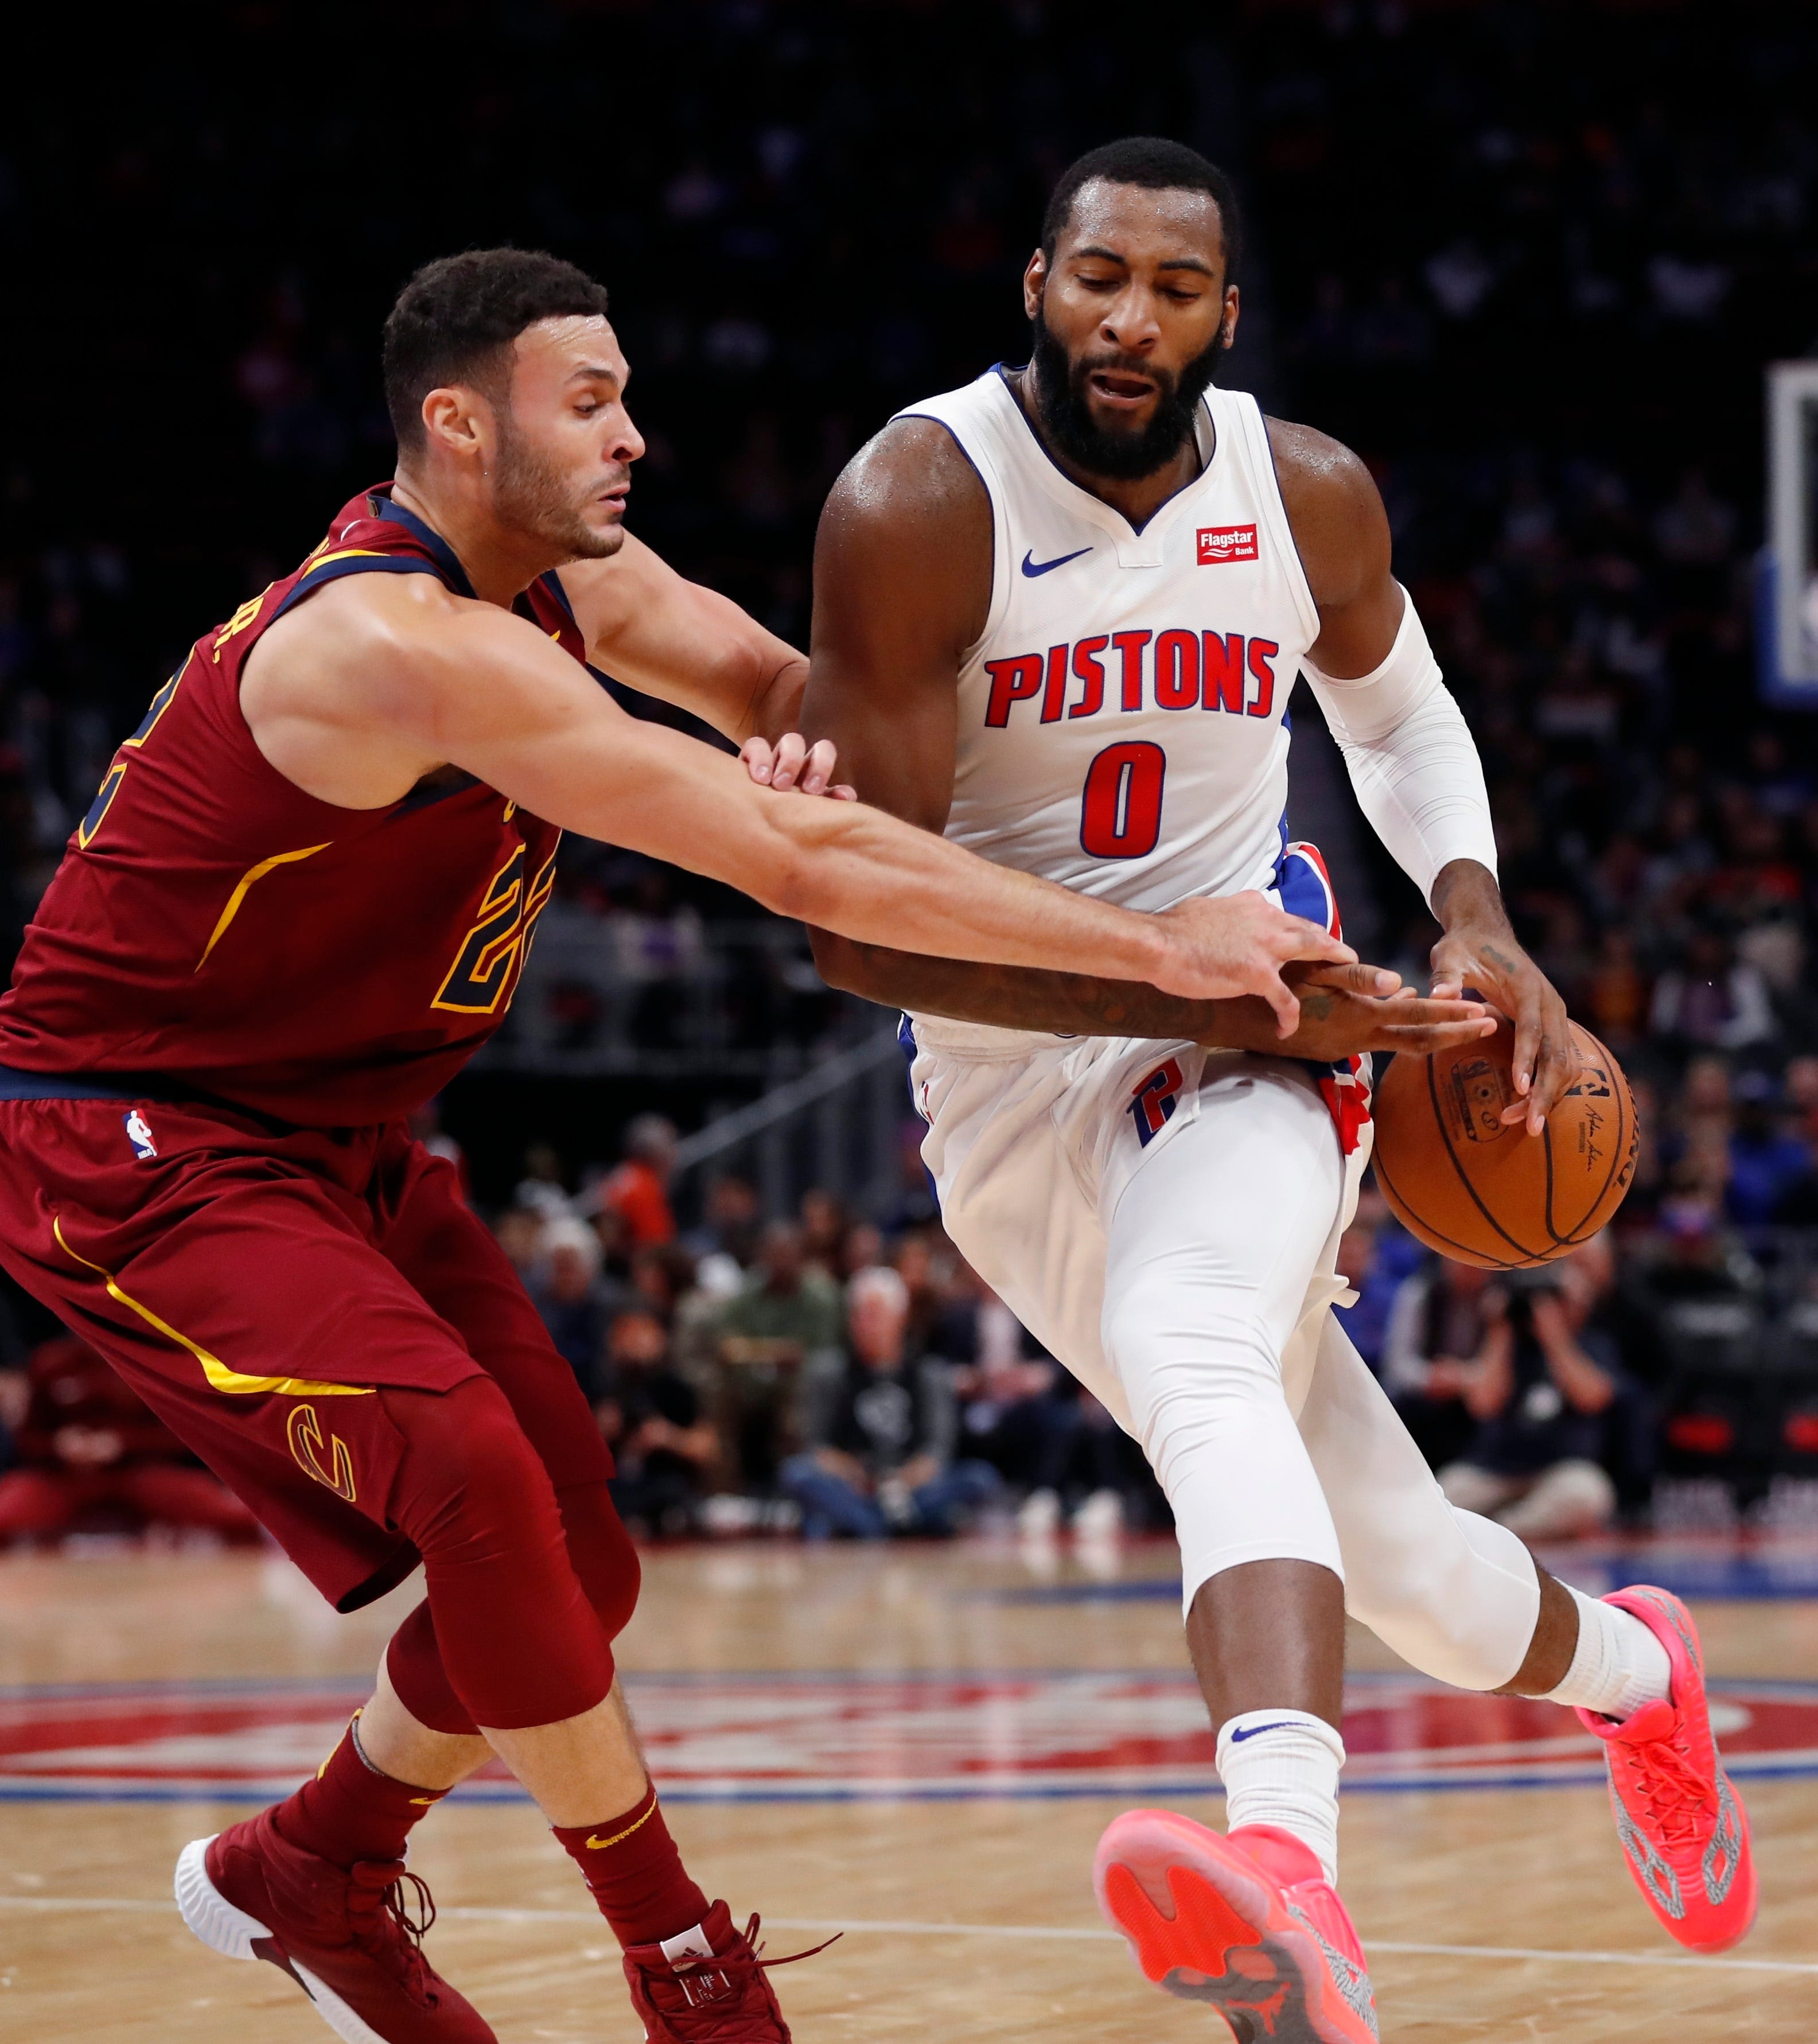 Cleveland Cavaliers forward Larry Nance Jr. (22) knocks the ball away from Detroit Pistons center Andre Drummond (0) during the first half.